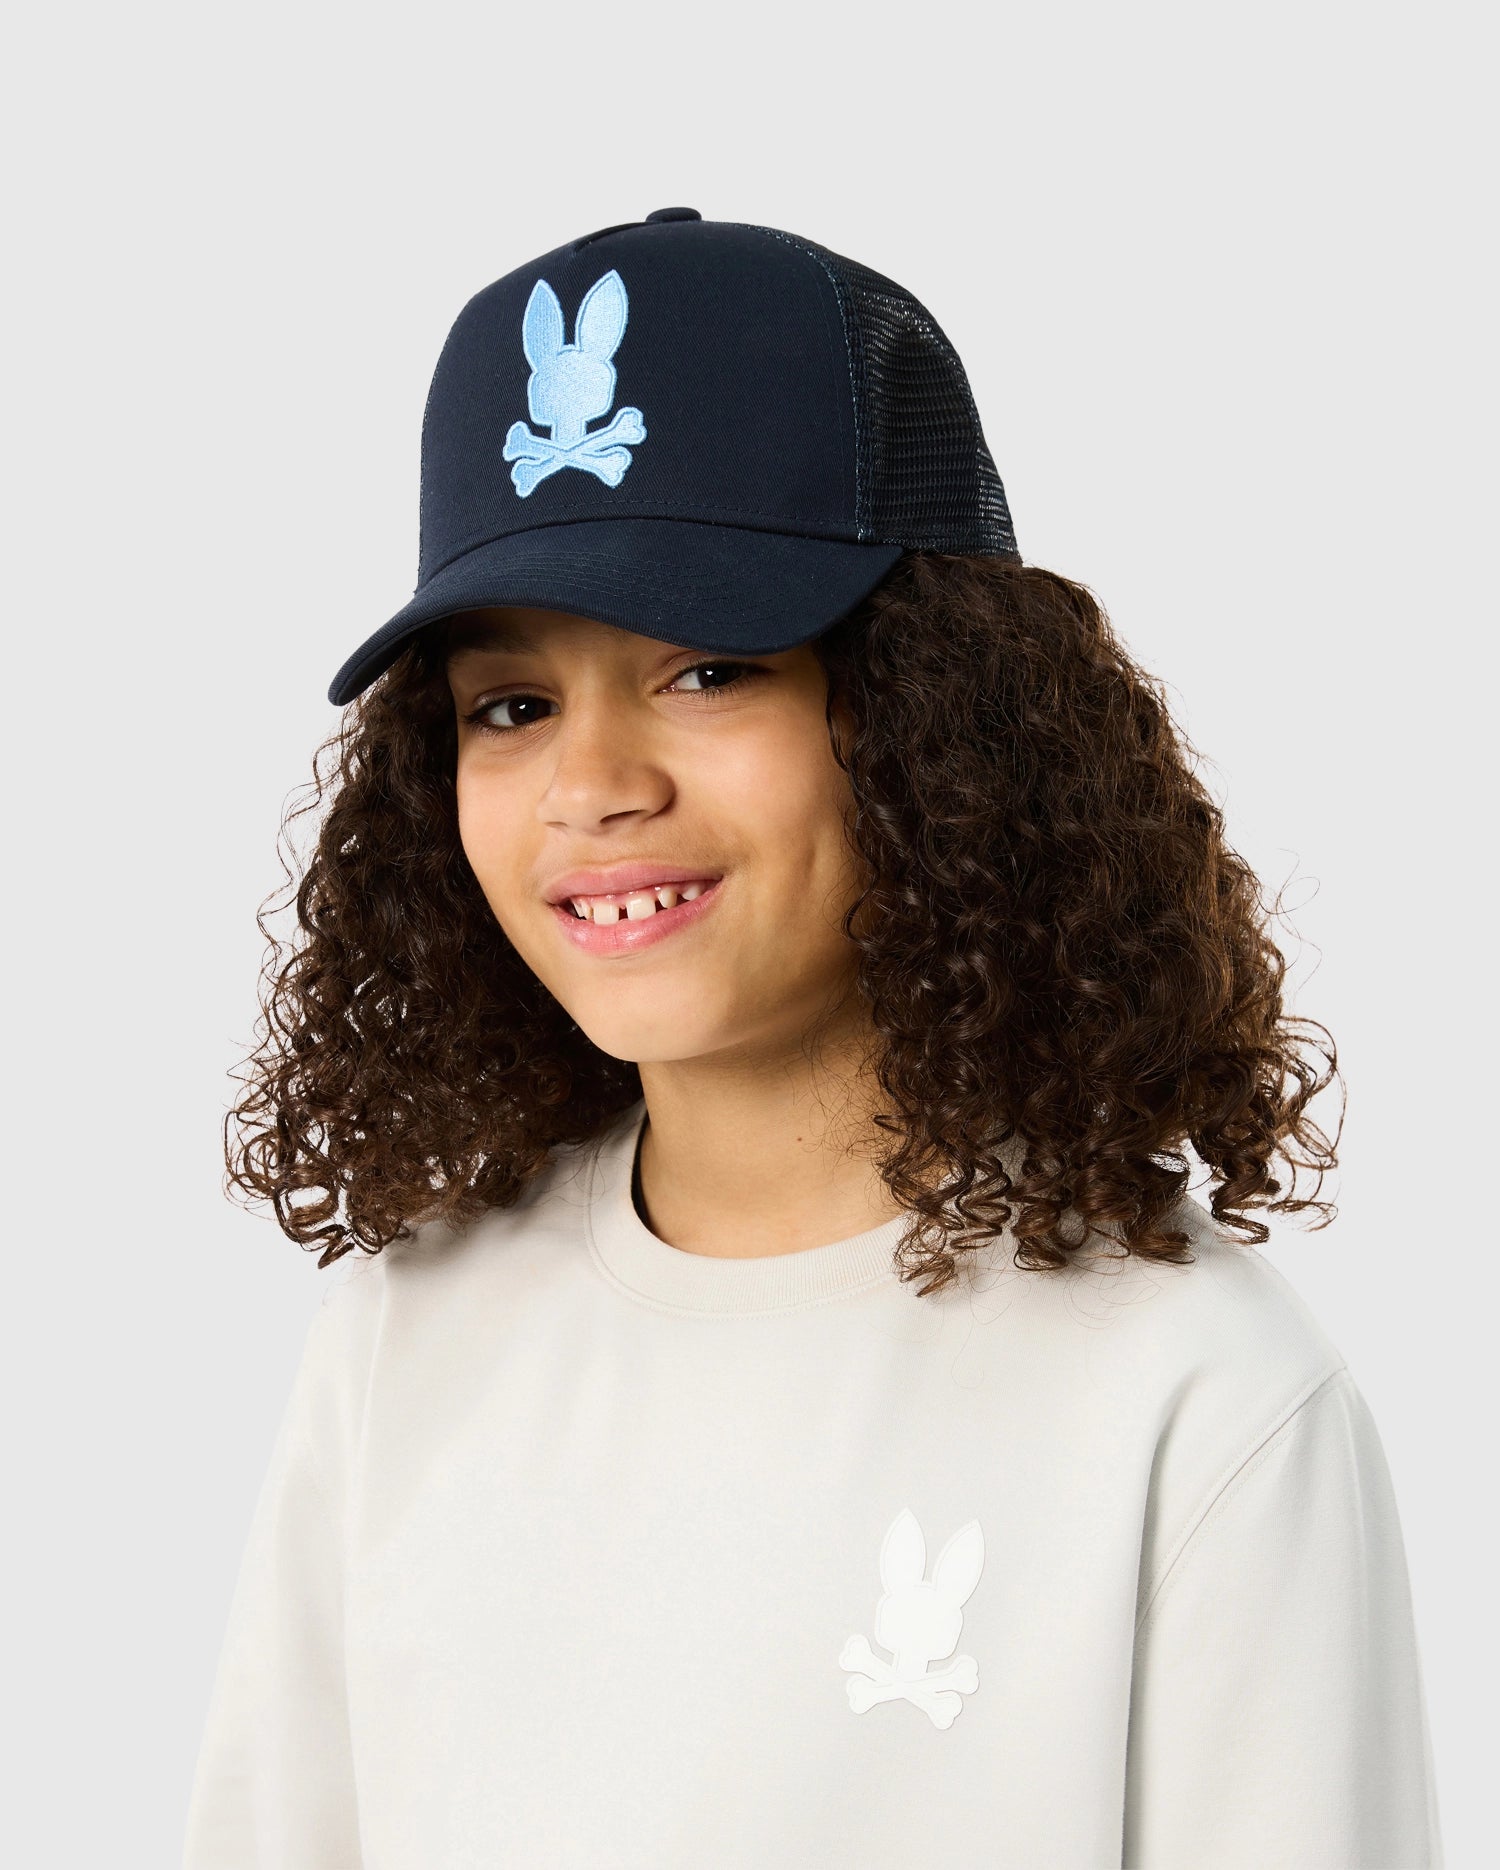 A young person with curly hair is smiling and wearing a beige sweatshirt with a bunny logo. They are also wearing a dark blue KIDS HOUSTON TRUCKER HAT - B0A550C2HT by Psycho Bunny featuring the same bunny logo in light blue, complete with snapback fastening for the perfect fit. The background is plain and light-colored.